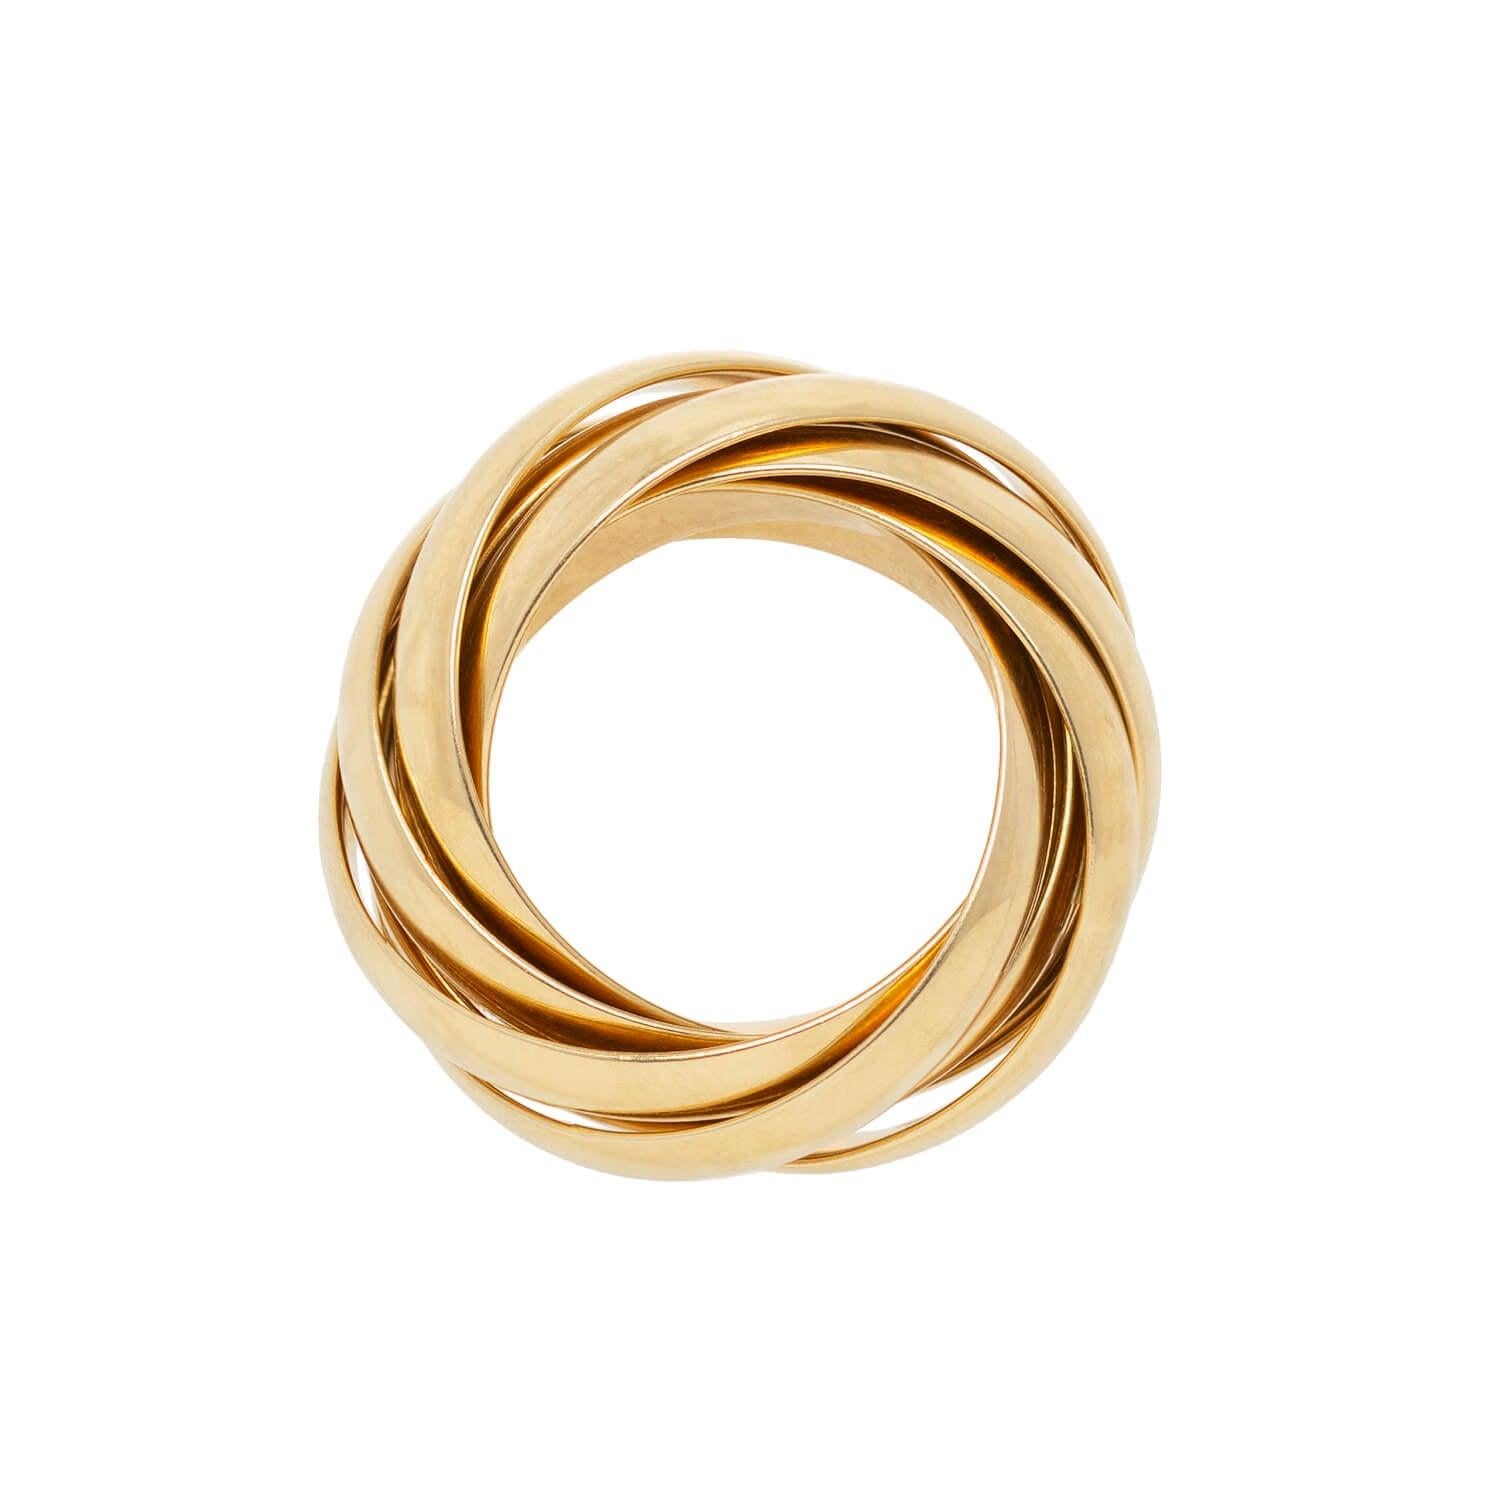 This ﻿Tiffany + Co Estate 18kt gold roller ring by Paloma Picasso is from her 